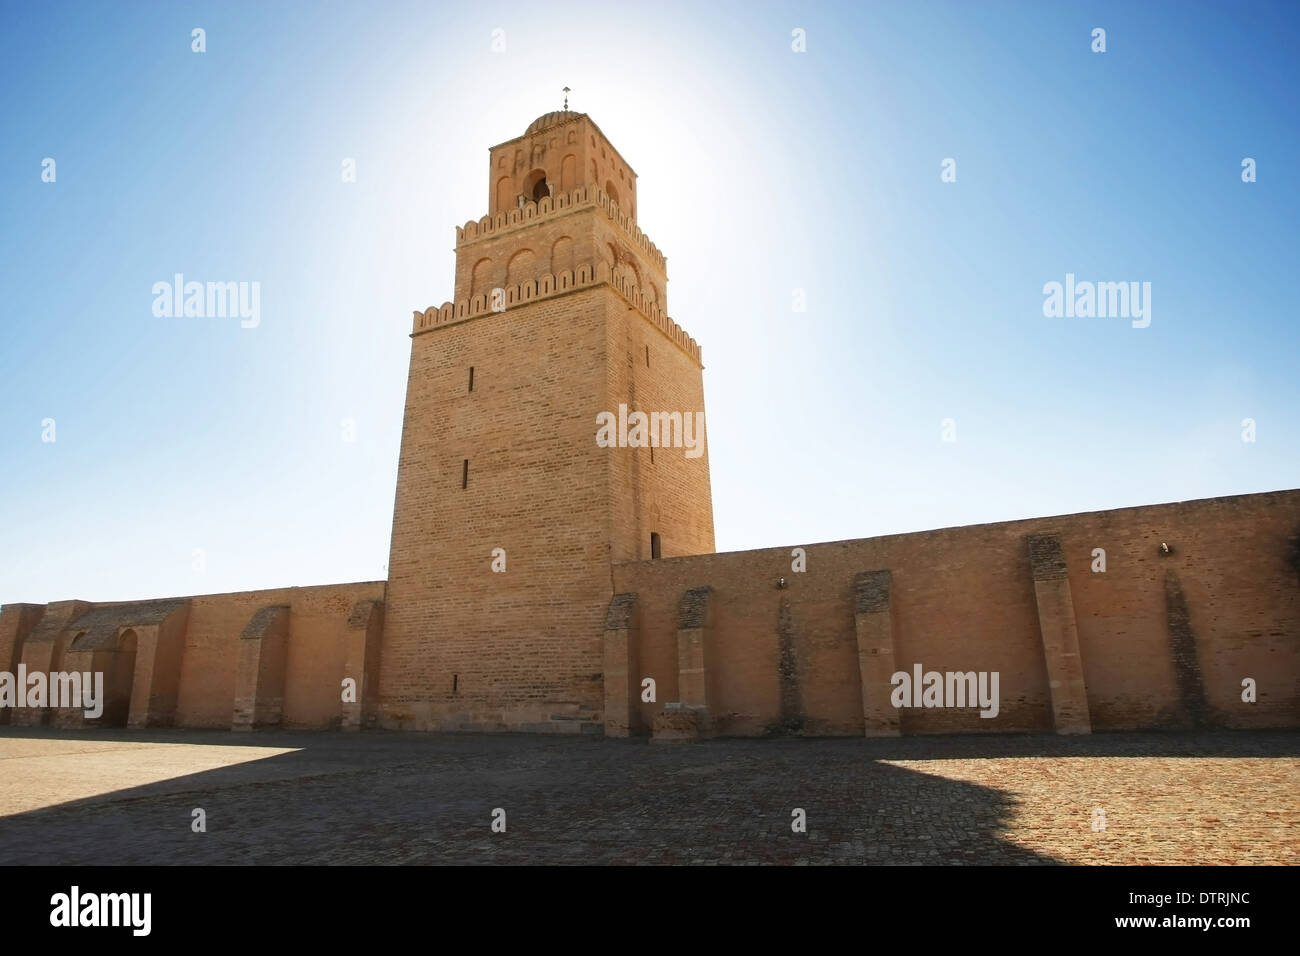 The Minaret Of The Great Mosque Of Kairouan One Of The Most Important